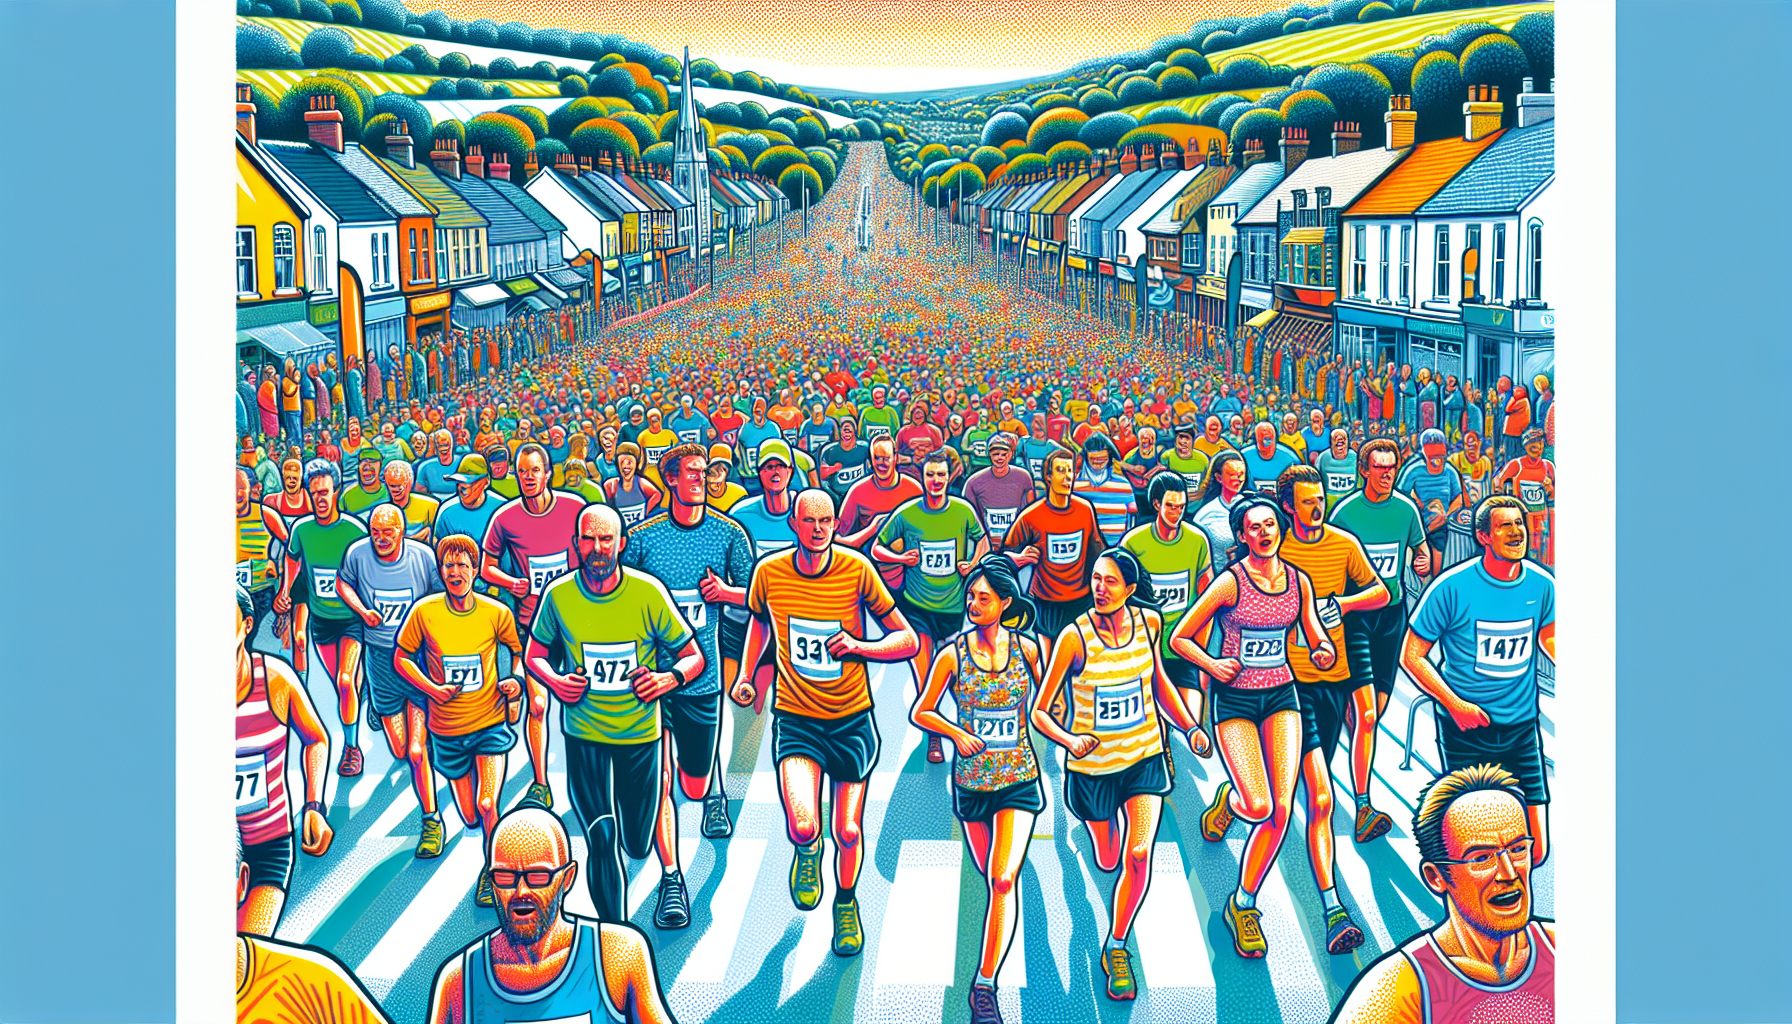 Runners at a local running event